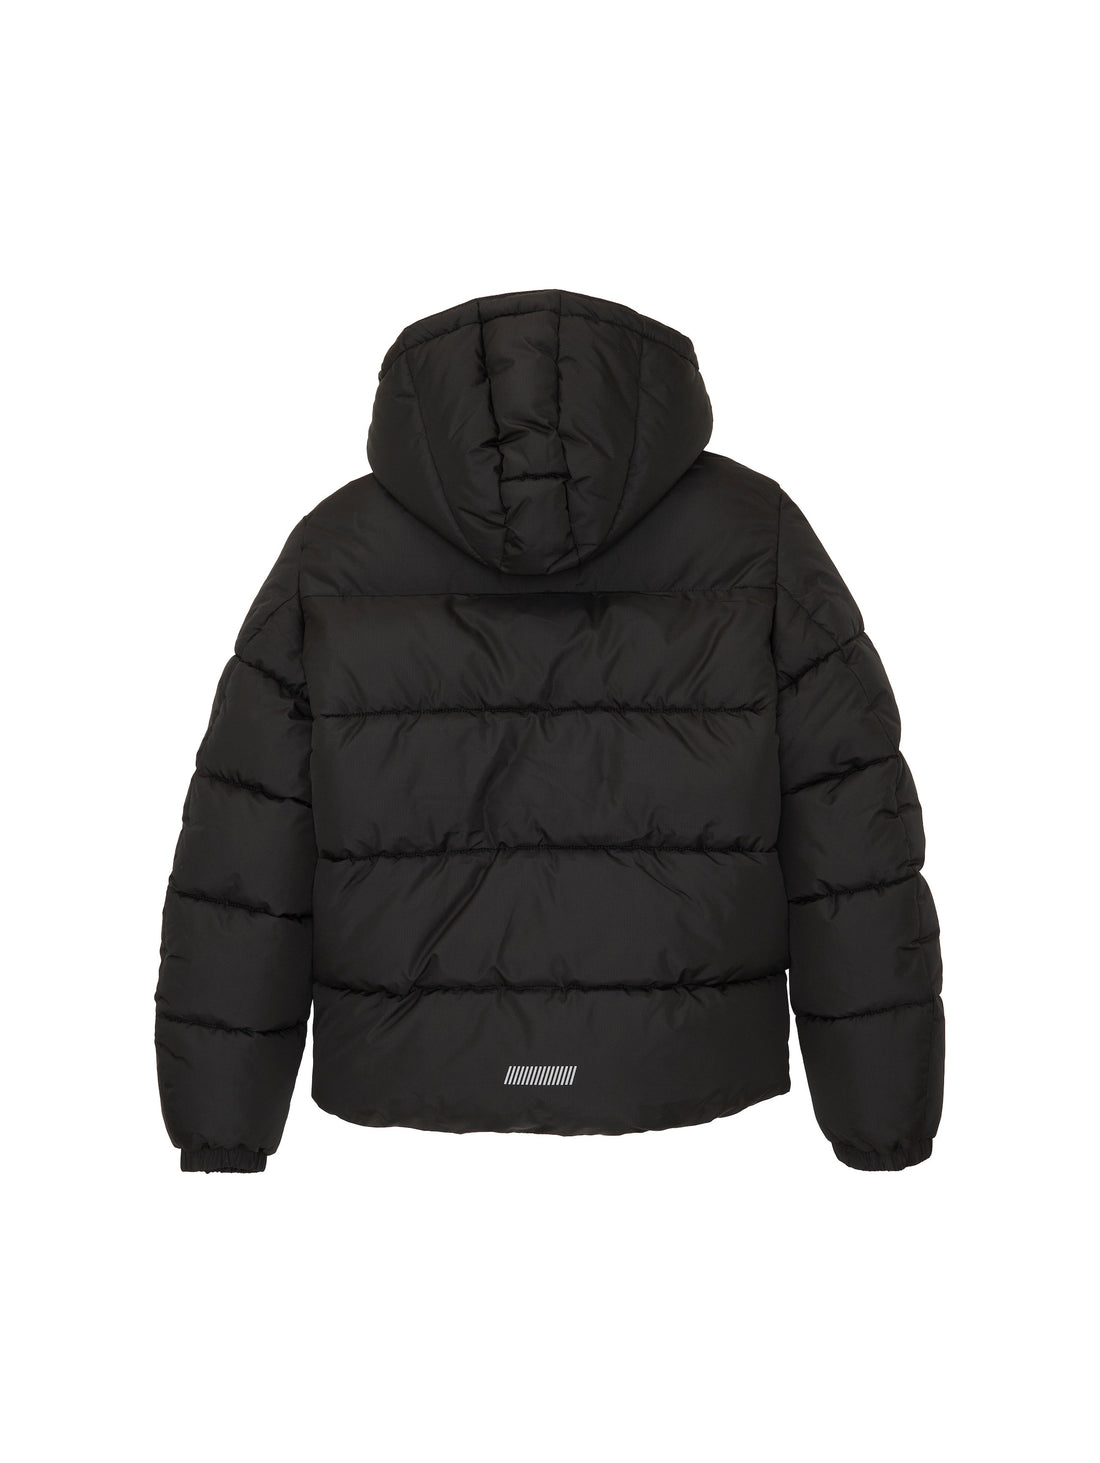 Heavy Puffer Jacket With Hood_1038540_29999_02